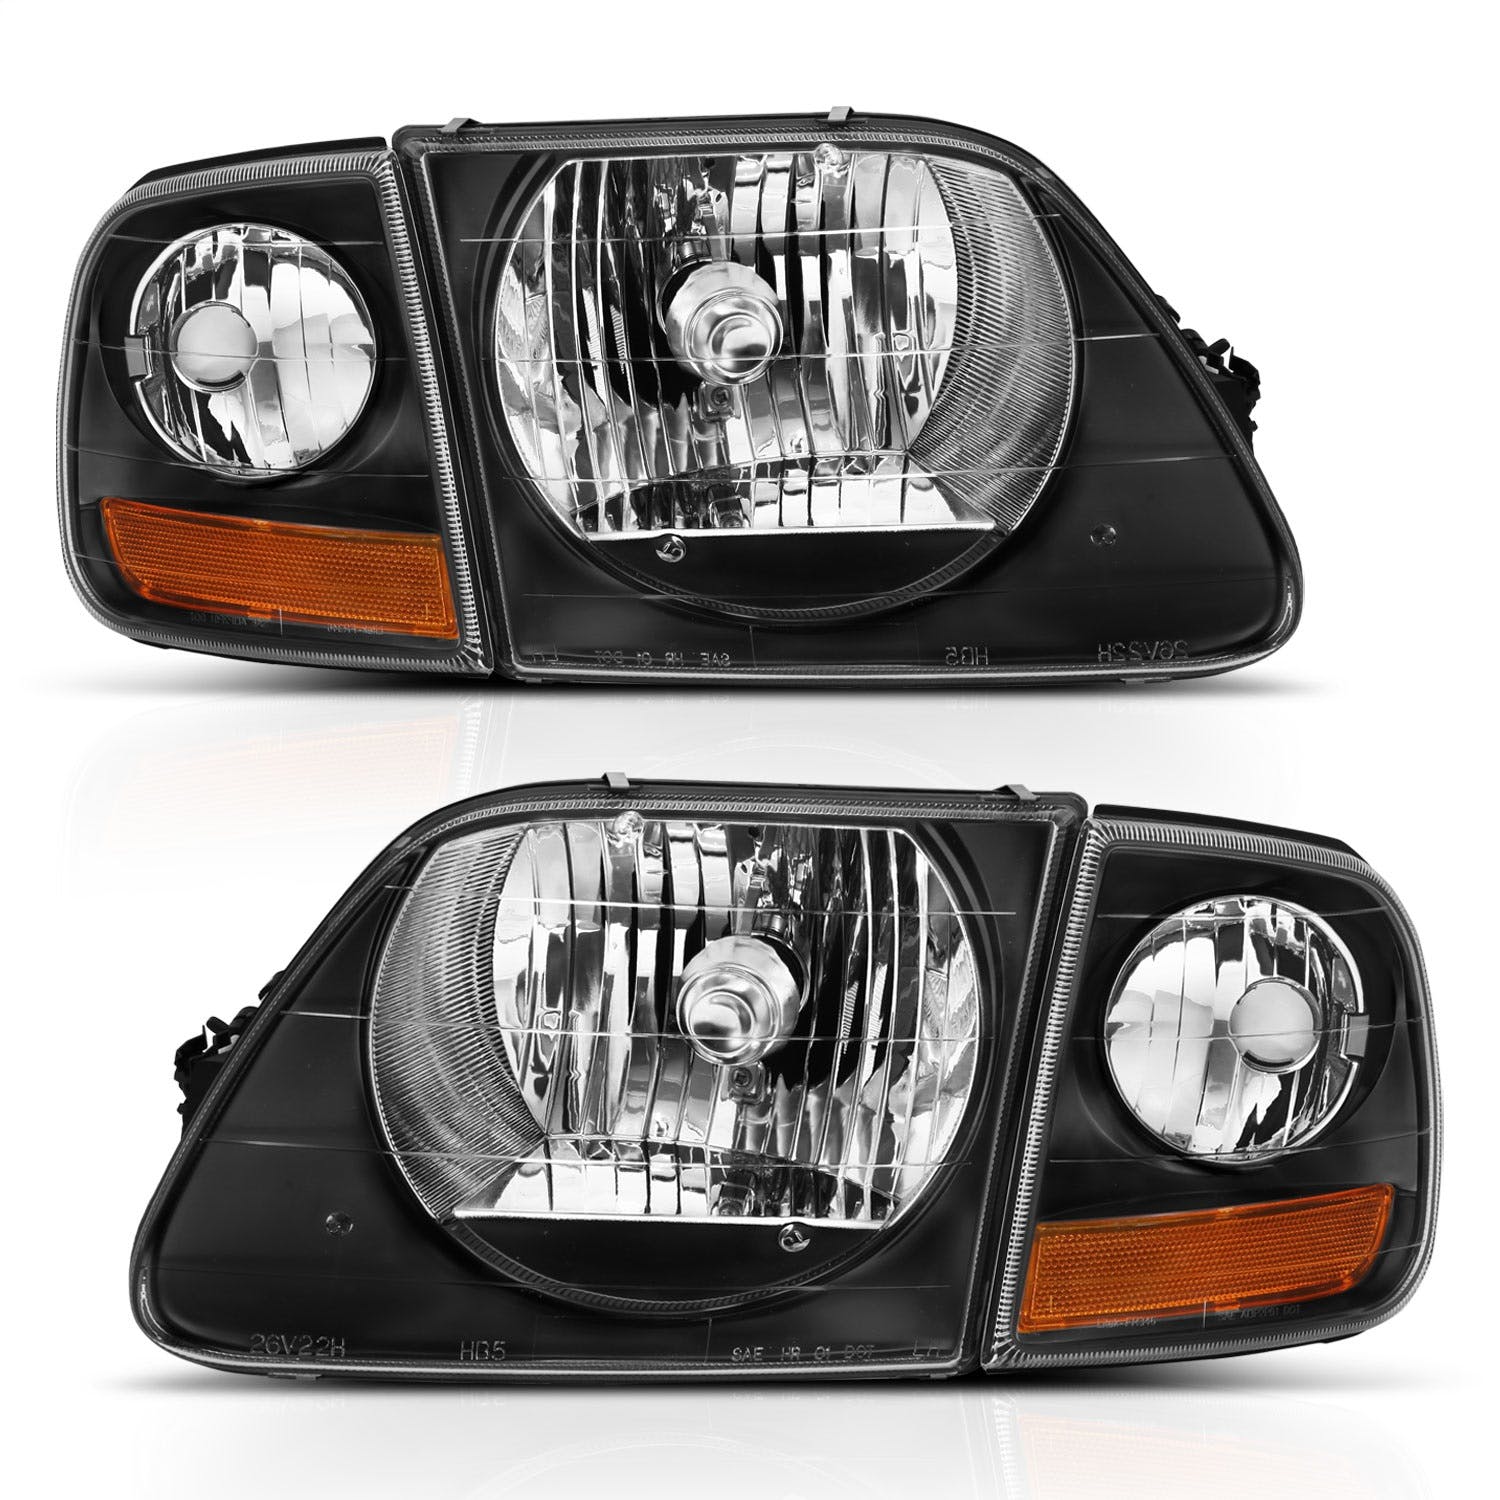 AnzoUSA 111460 Crystal Headlight Black with Parking Light